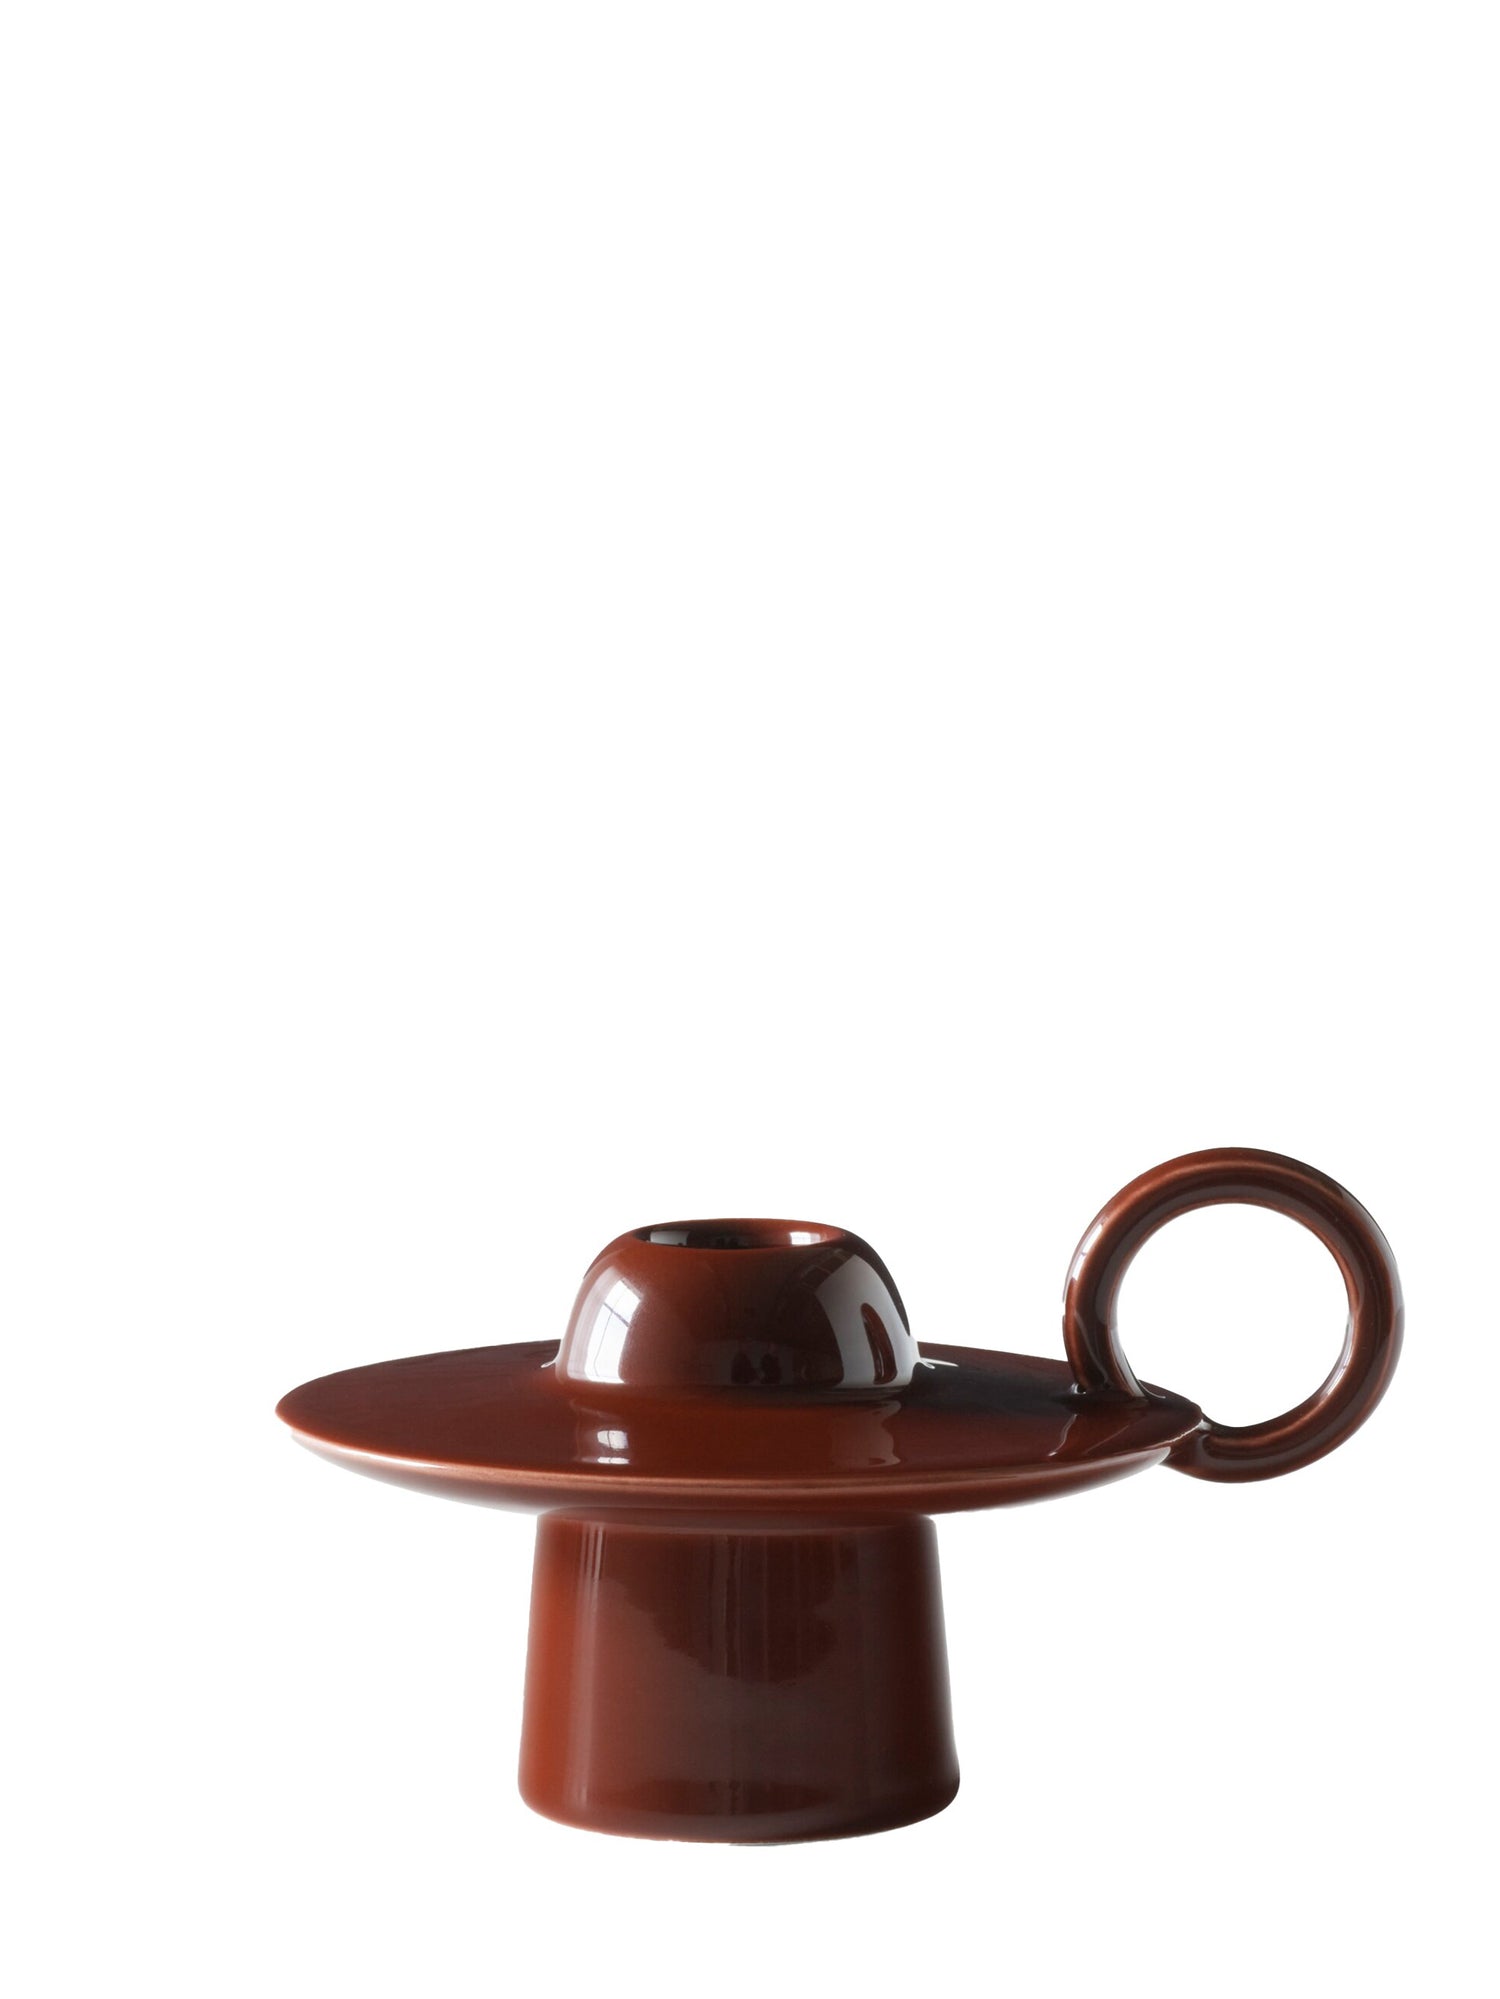 Momento Candleholder JH39, Red Brown